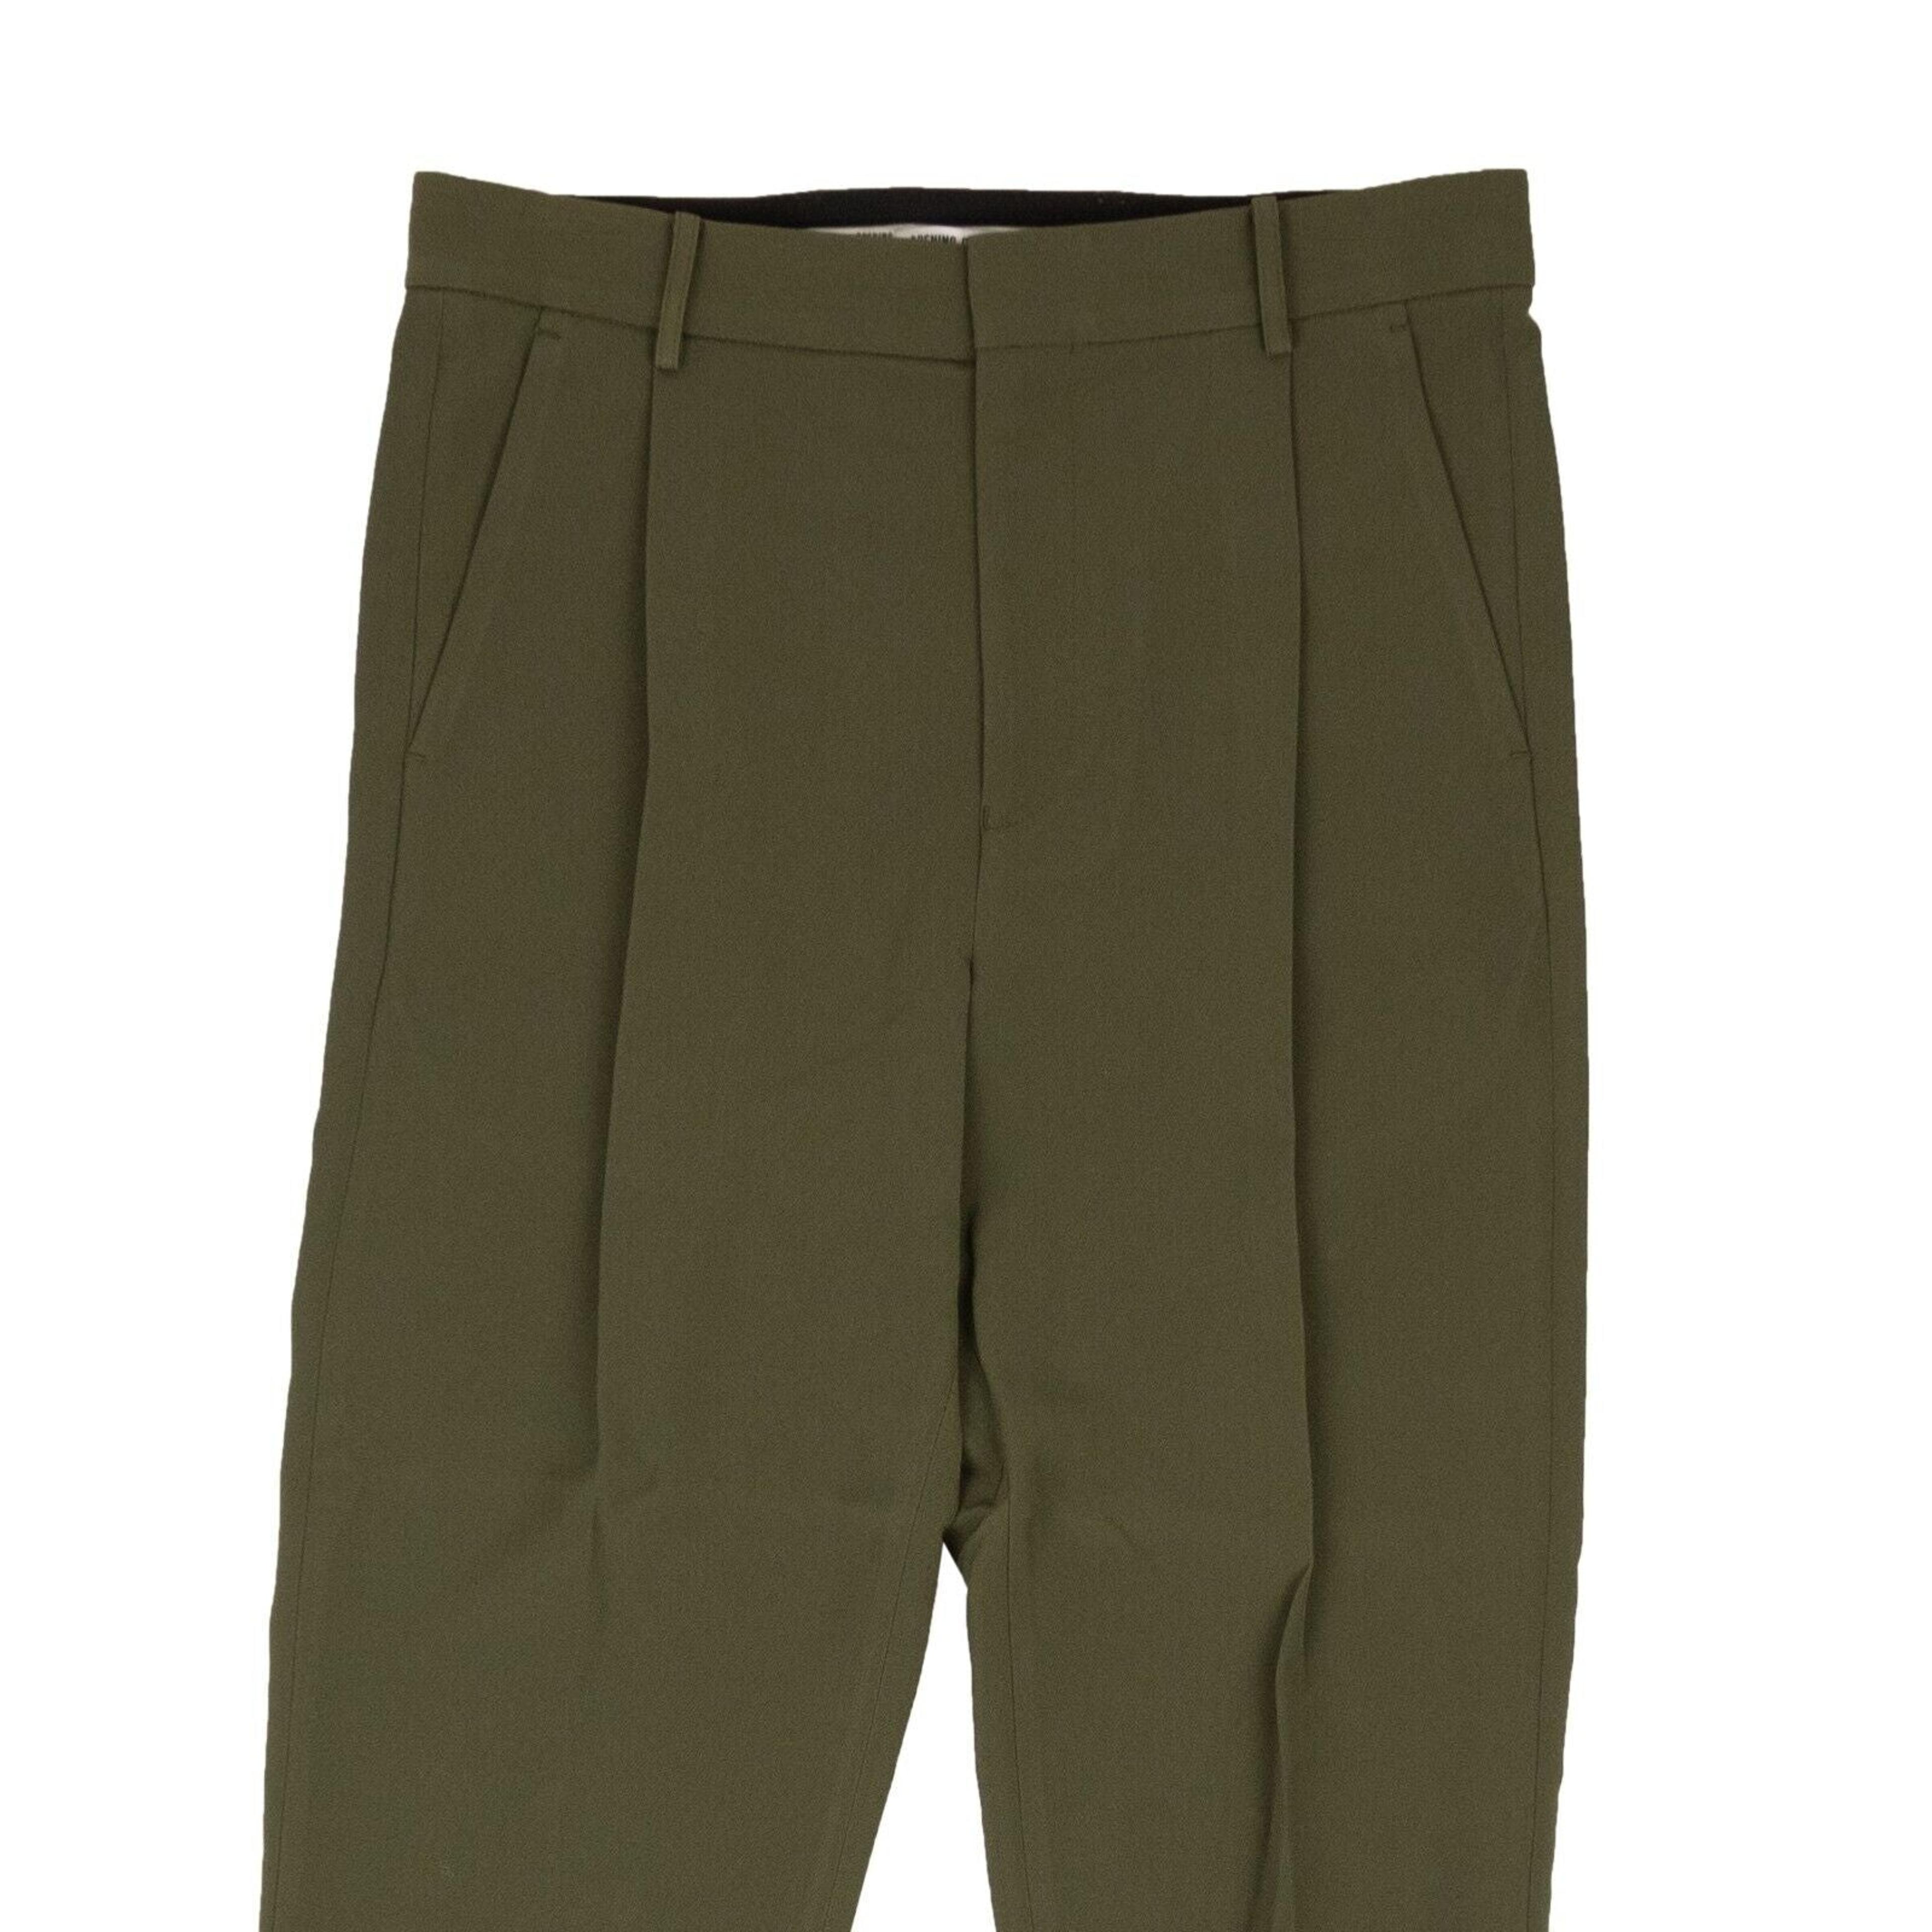 Alternate View 1 of Olive Green Polyester Twill Trousers